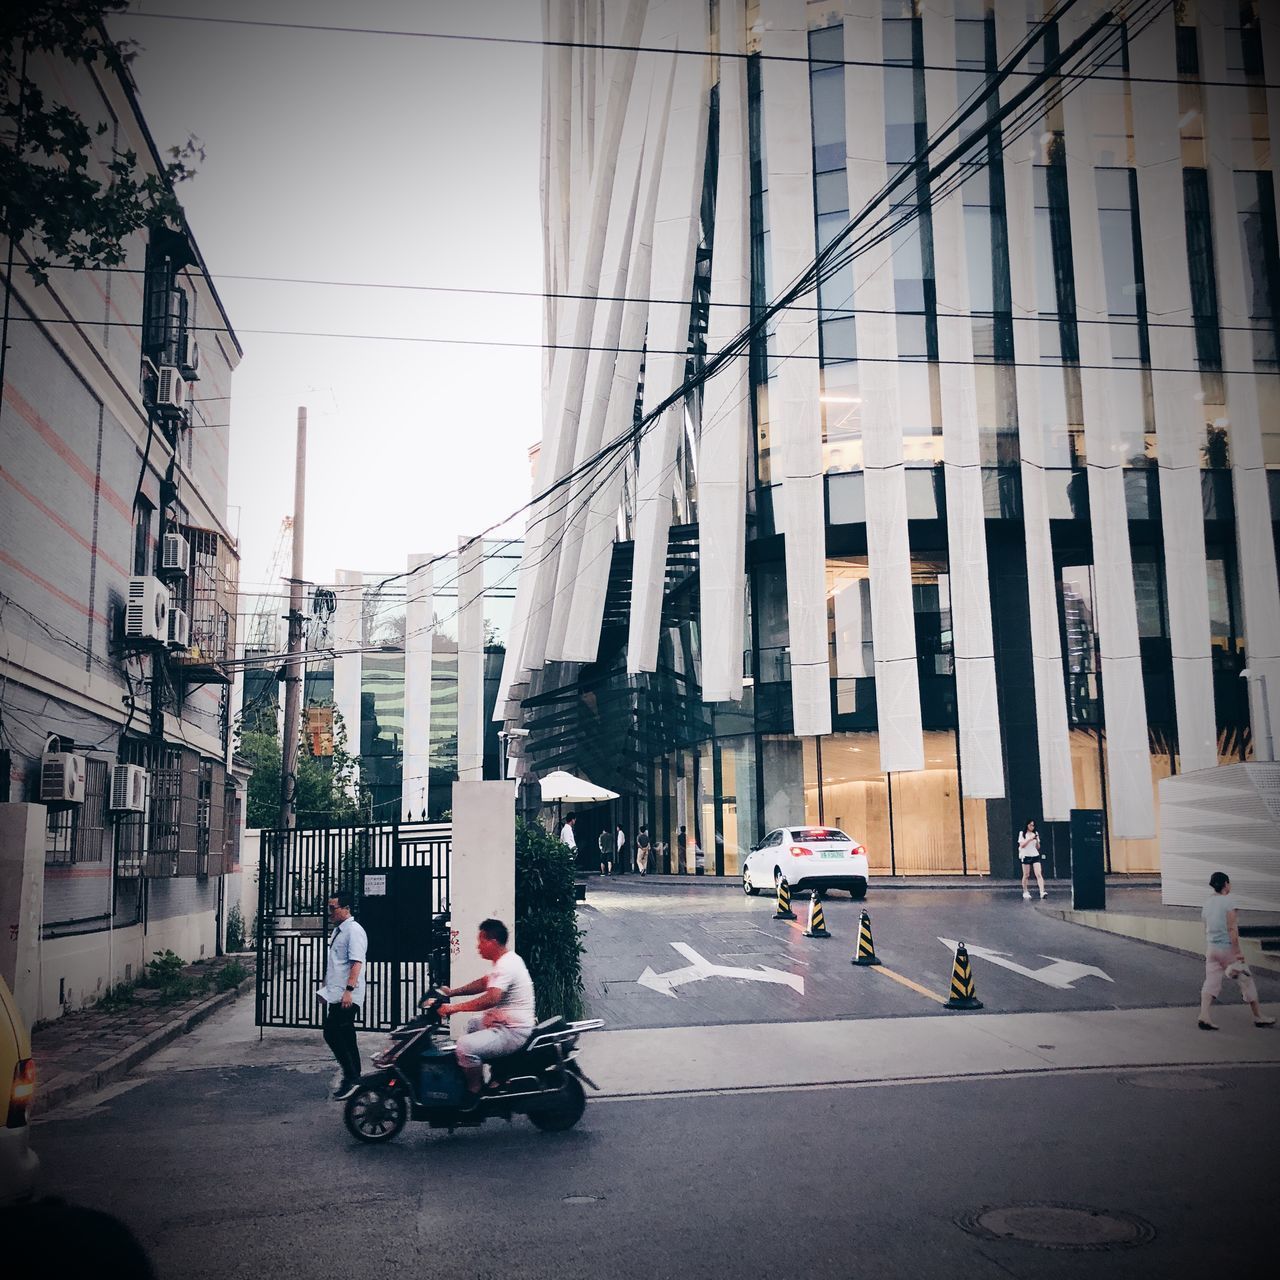 MAN RIDING MOTOR SCOOTER ON ROAD BY BUILDINGS